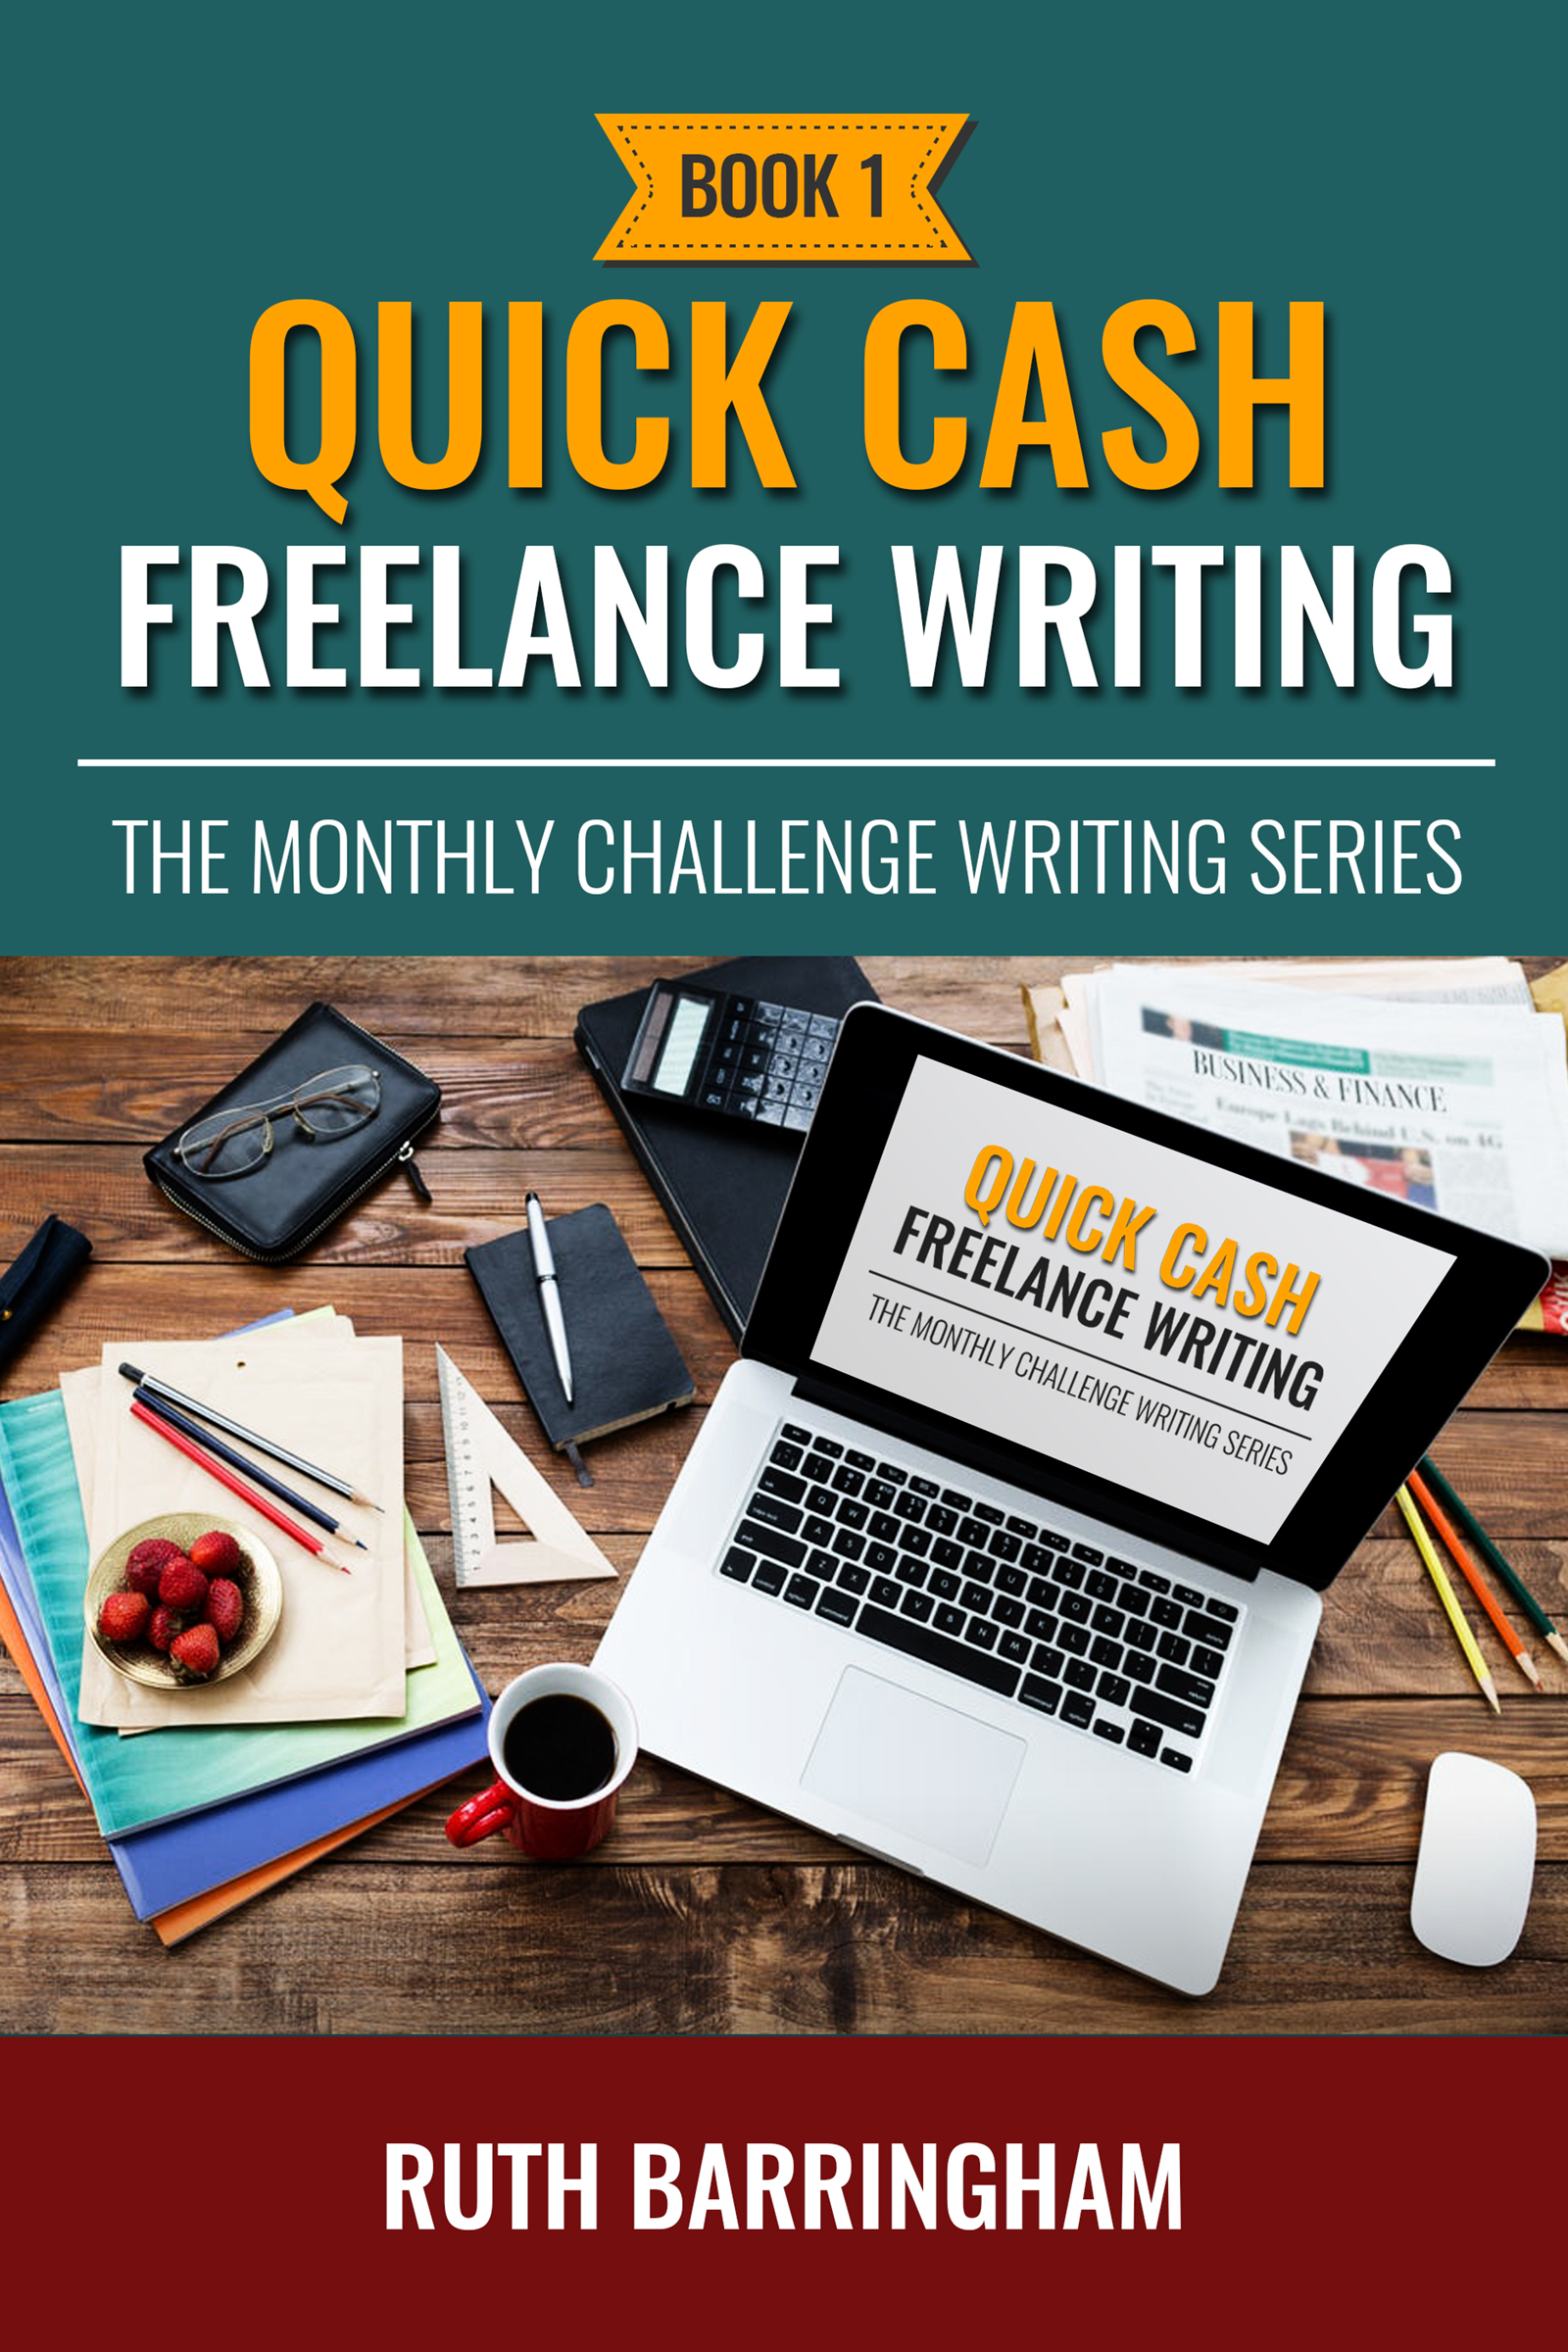 The Monthly Challenge Writing Series